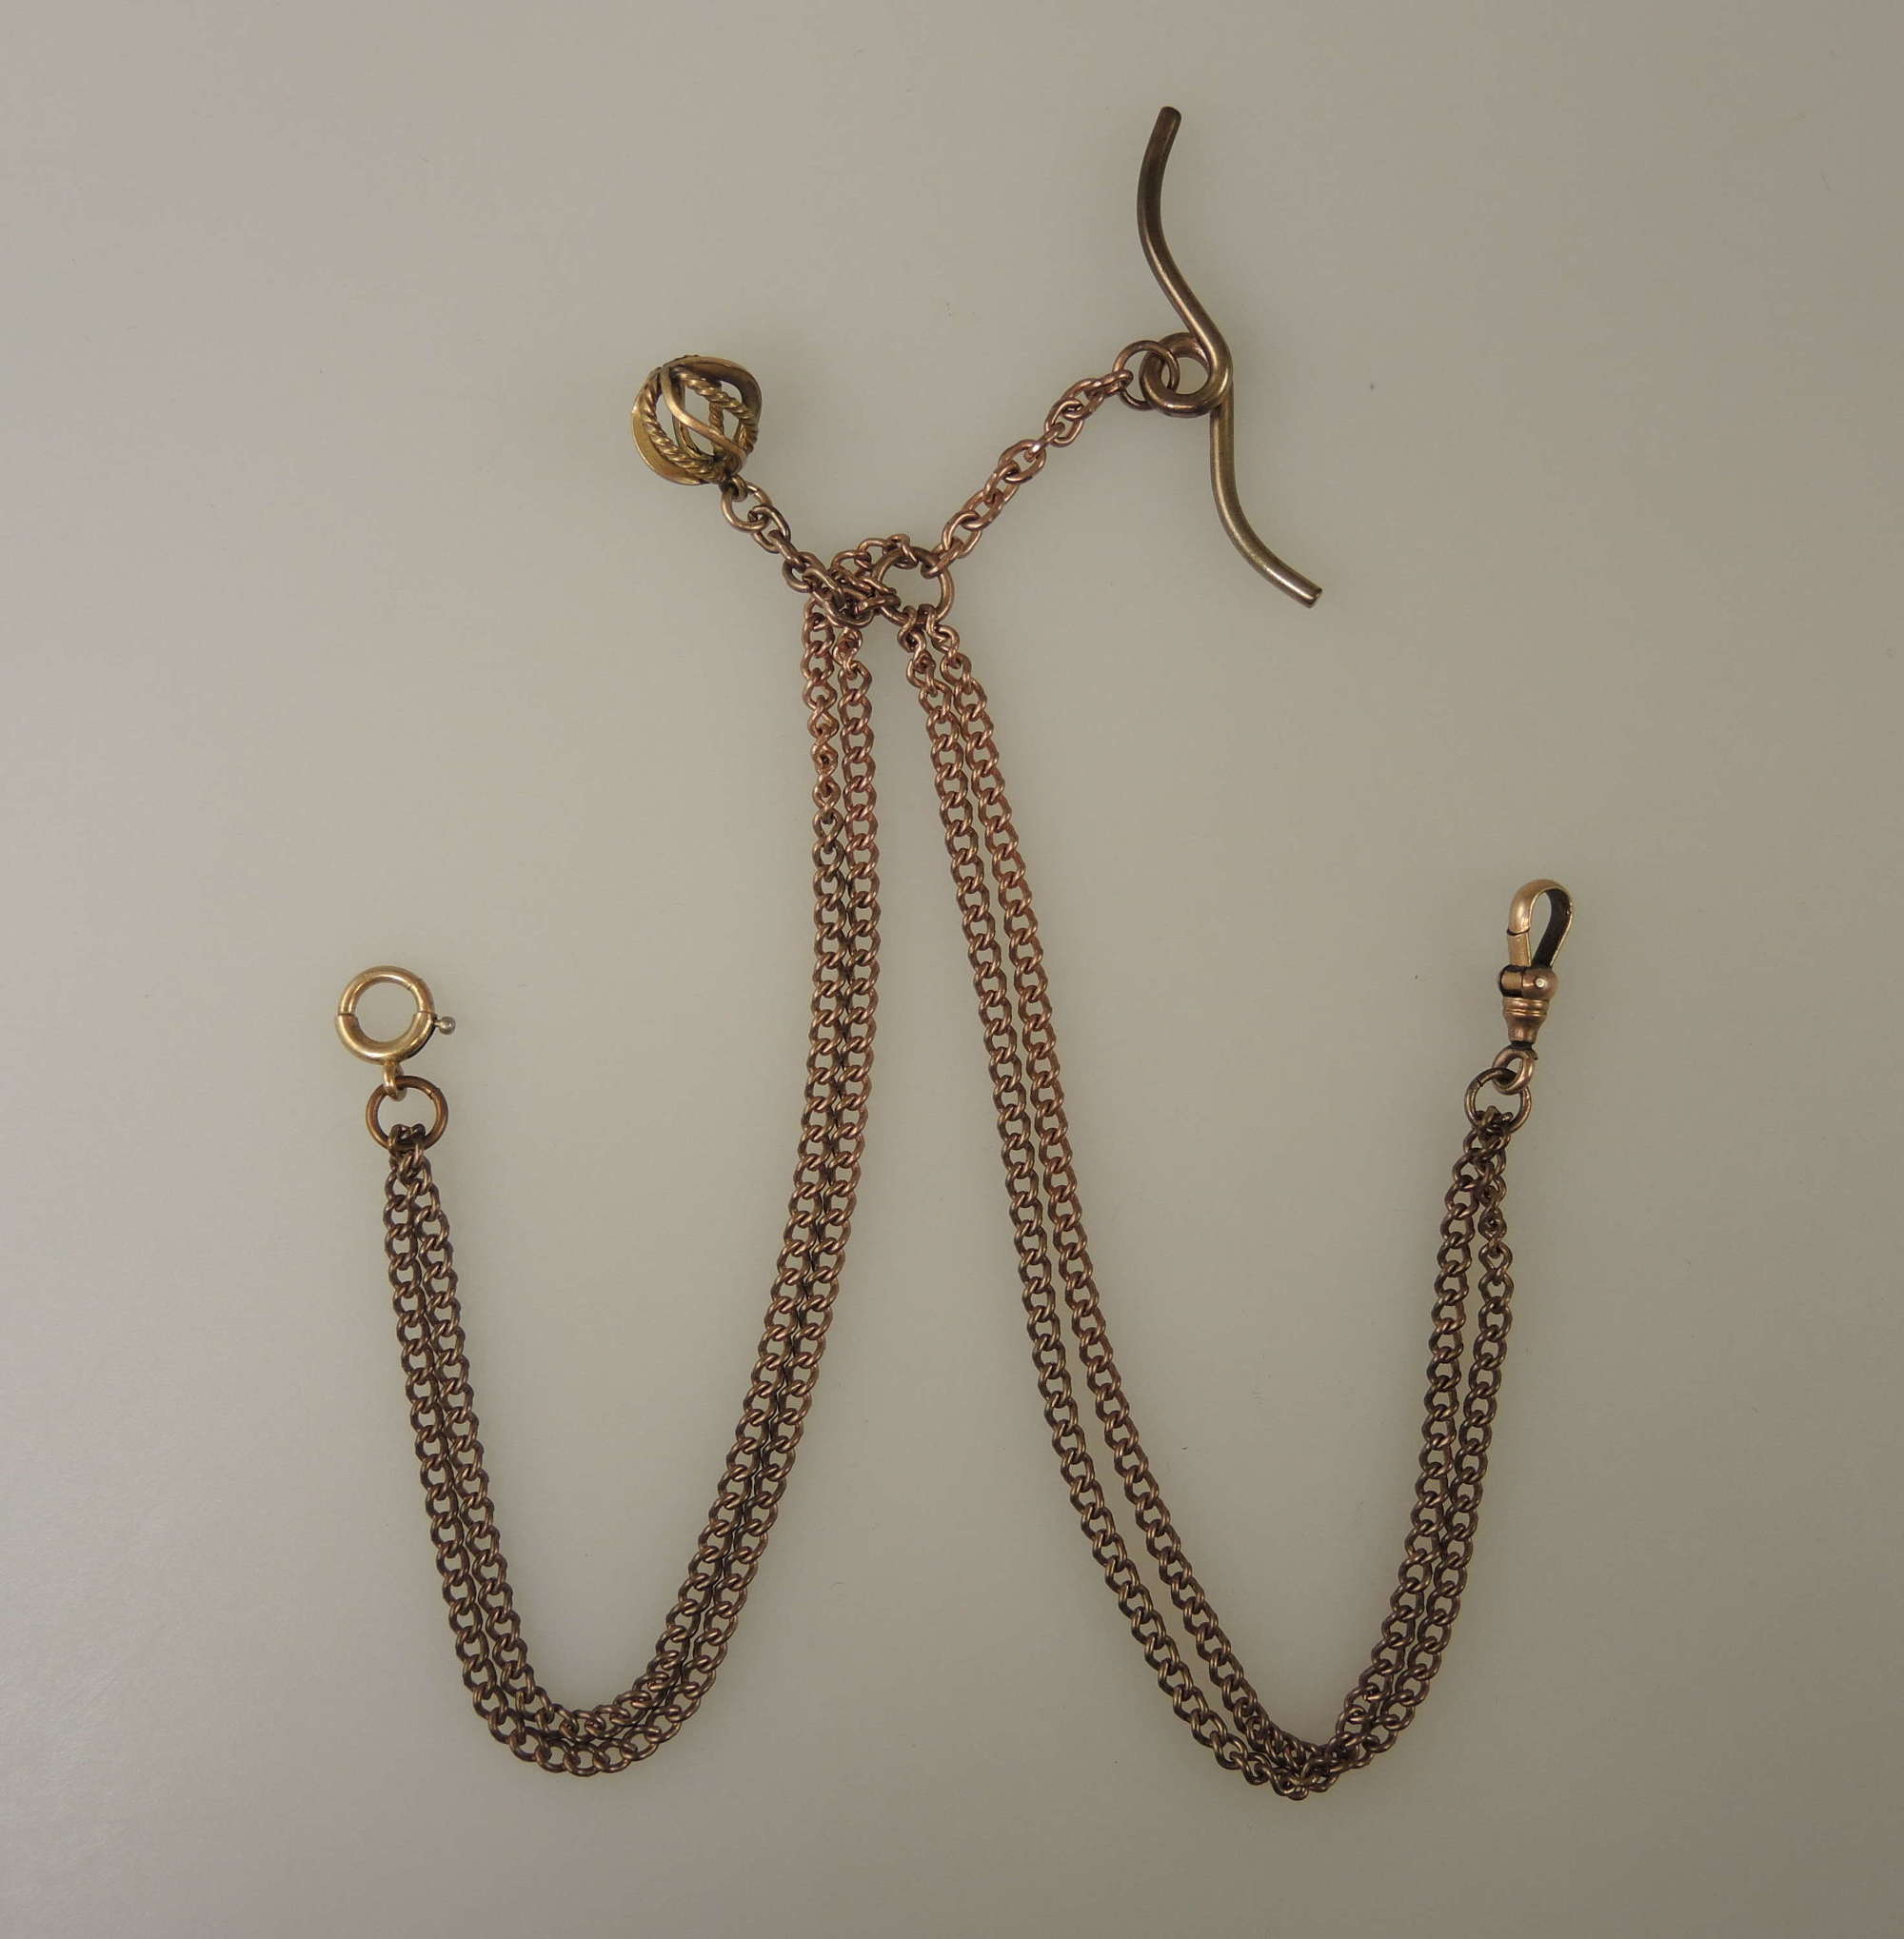 Victorian gold plated pocket watch chain c1890